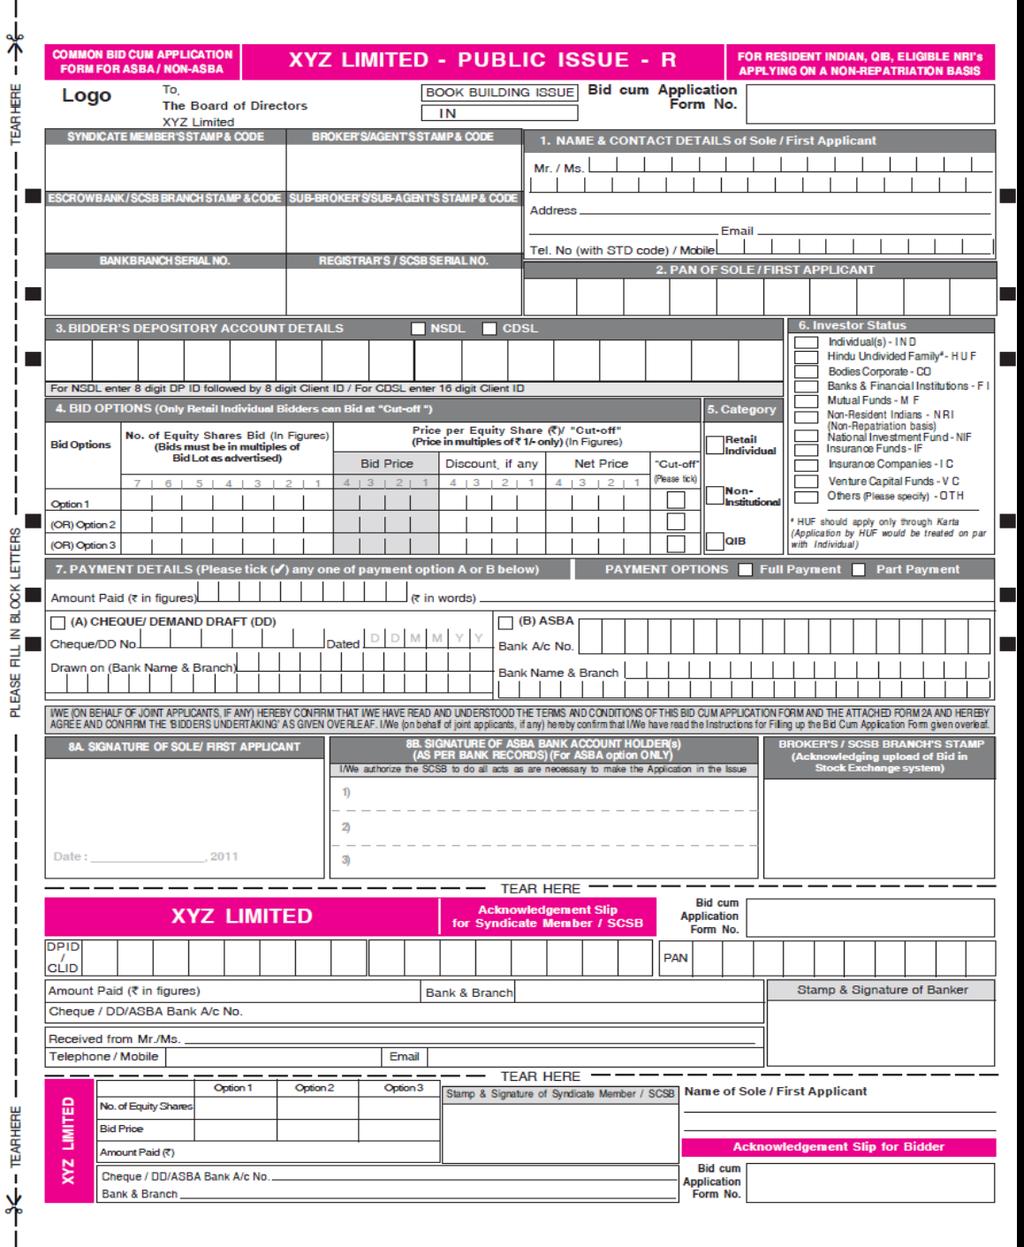 Instructions to fill each field of the Bid cum Application Form can be found on the reverse side of the Bid cum Application Form.